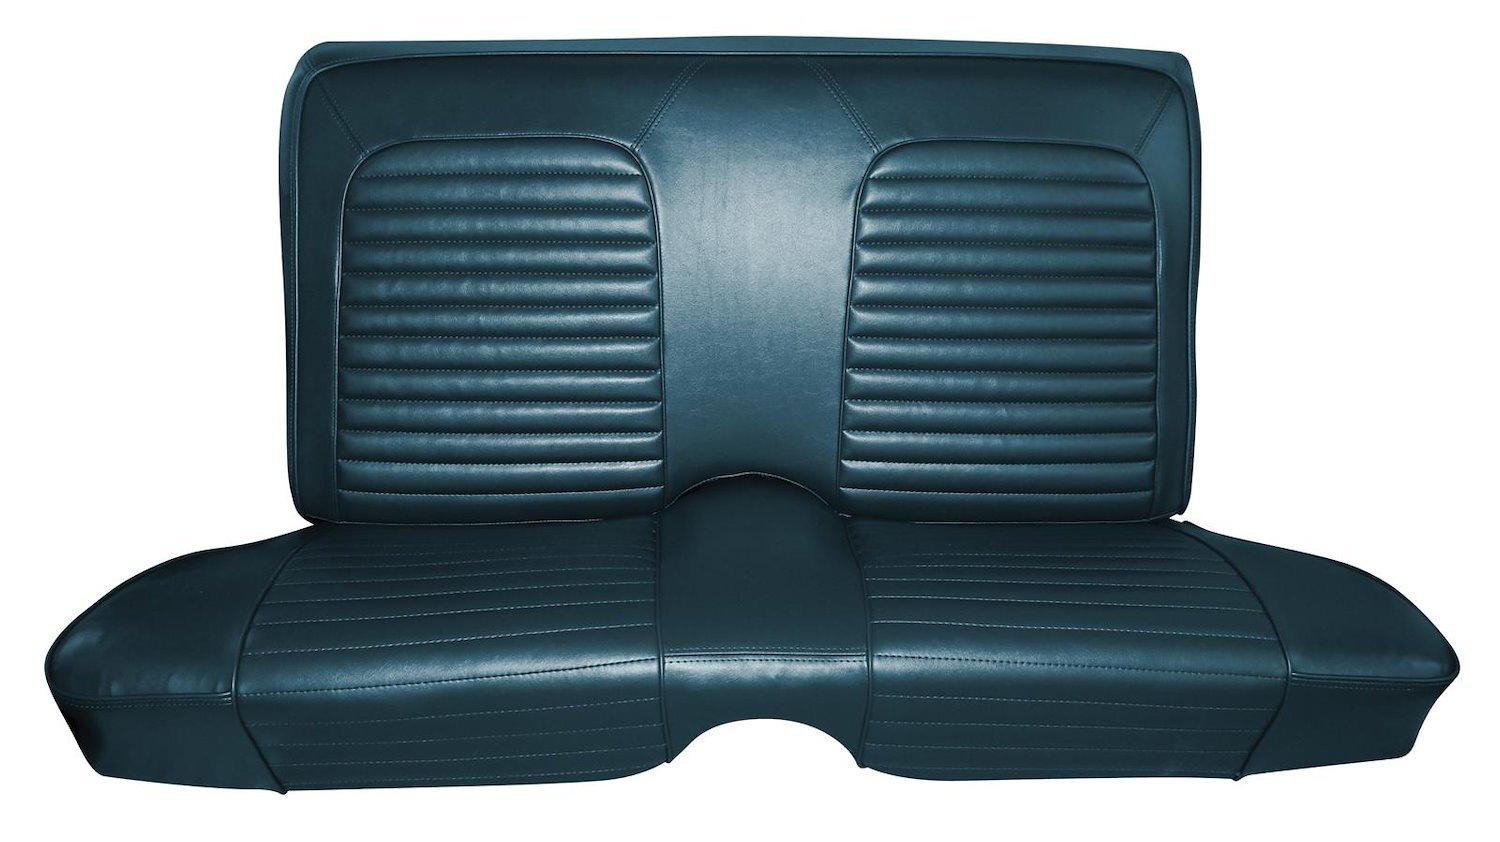 1968 Chevrolet Chevelle Malibu and Super Sport Convertible Interior Rear Bench Seat Upholstery Set